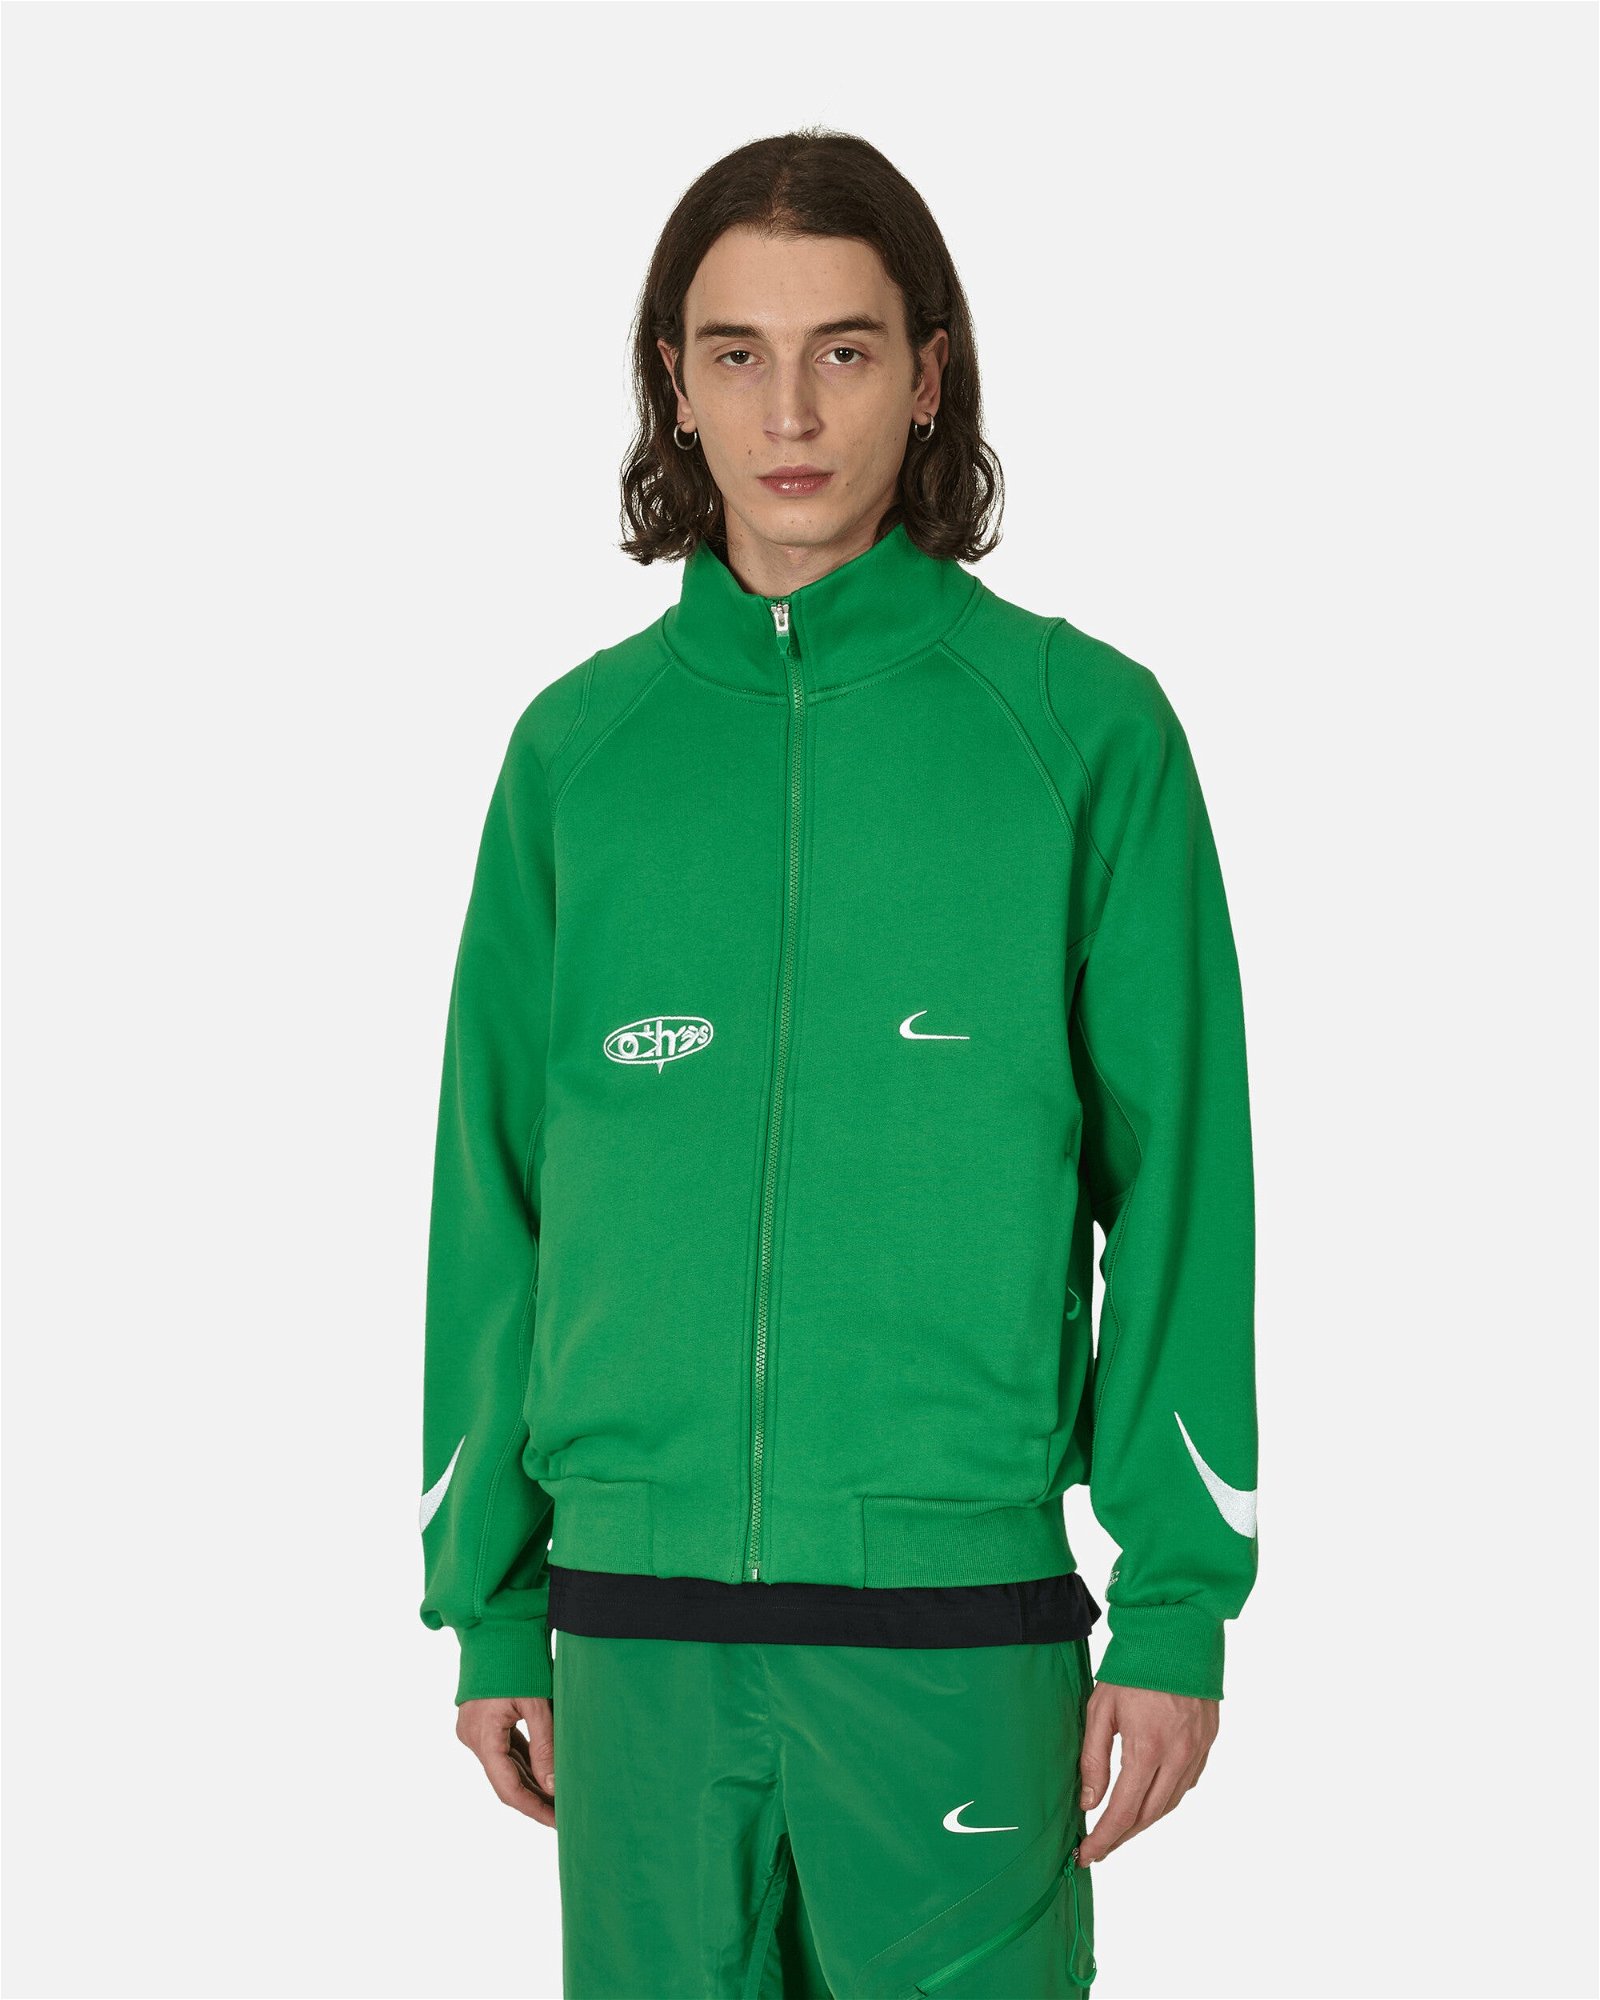 Off-White x Track Jacket "Kelly Green"